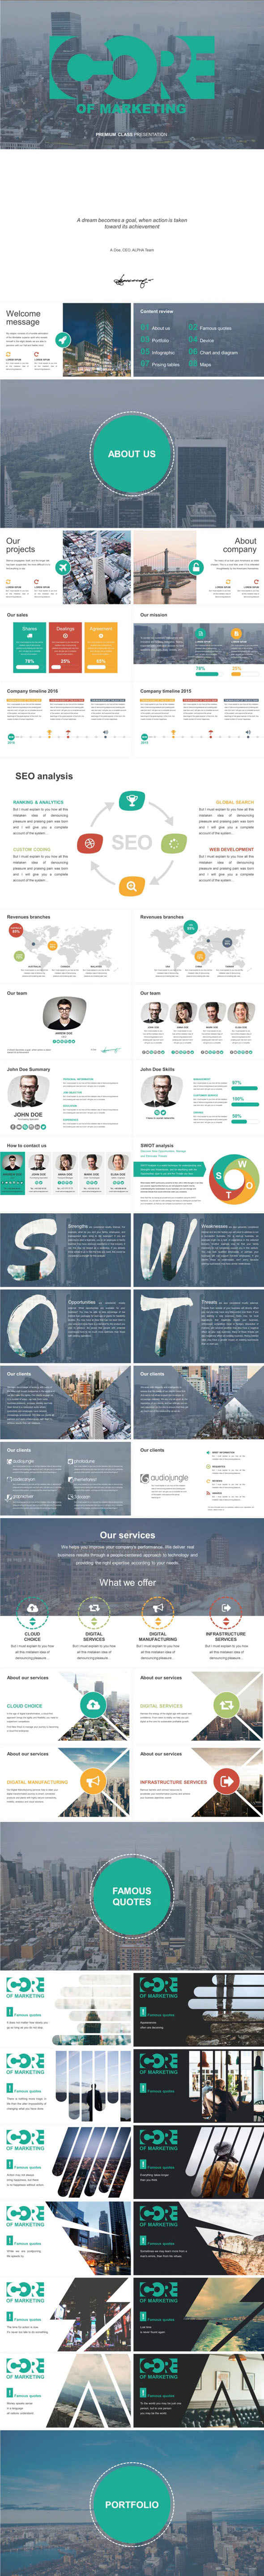 Core Of Marketing Powerpoint Creative Template